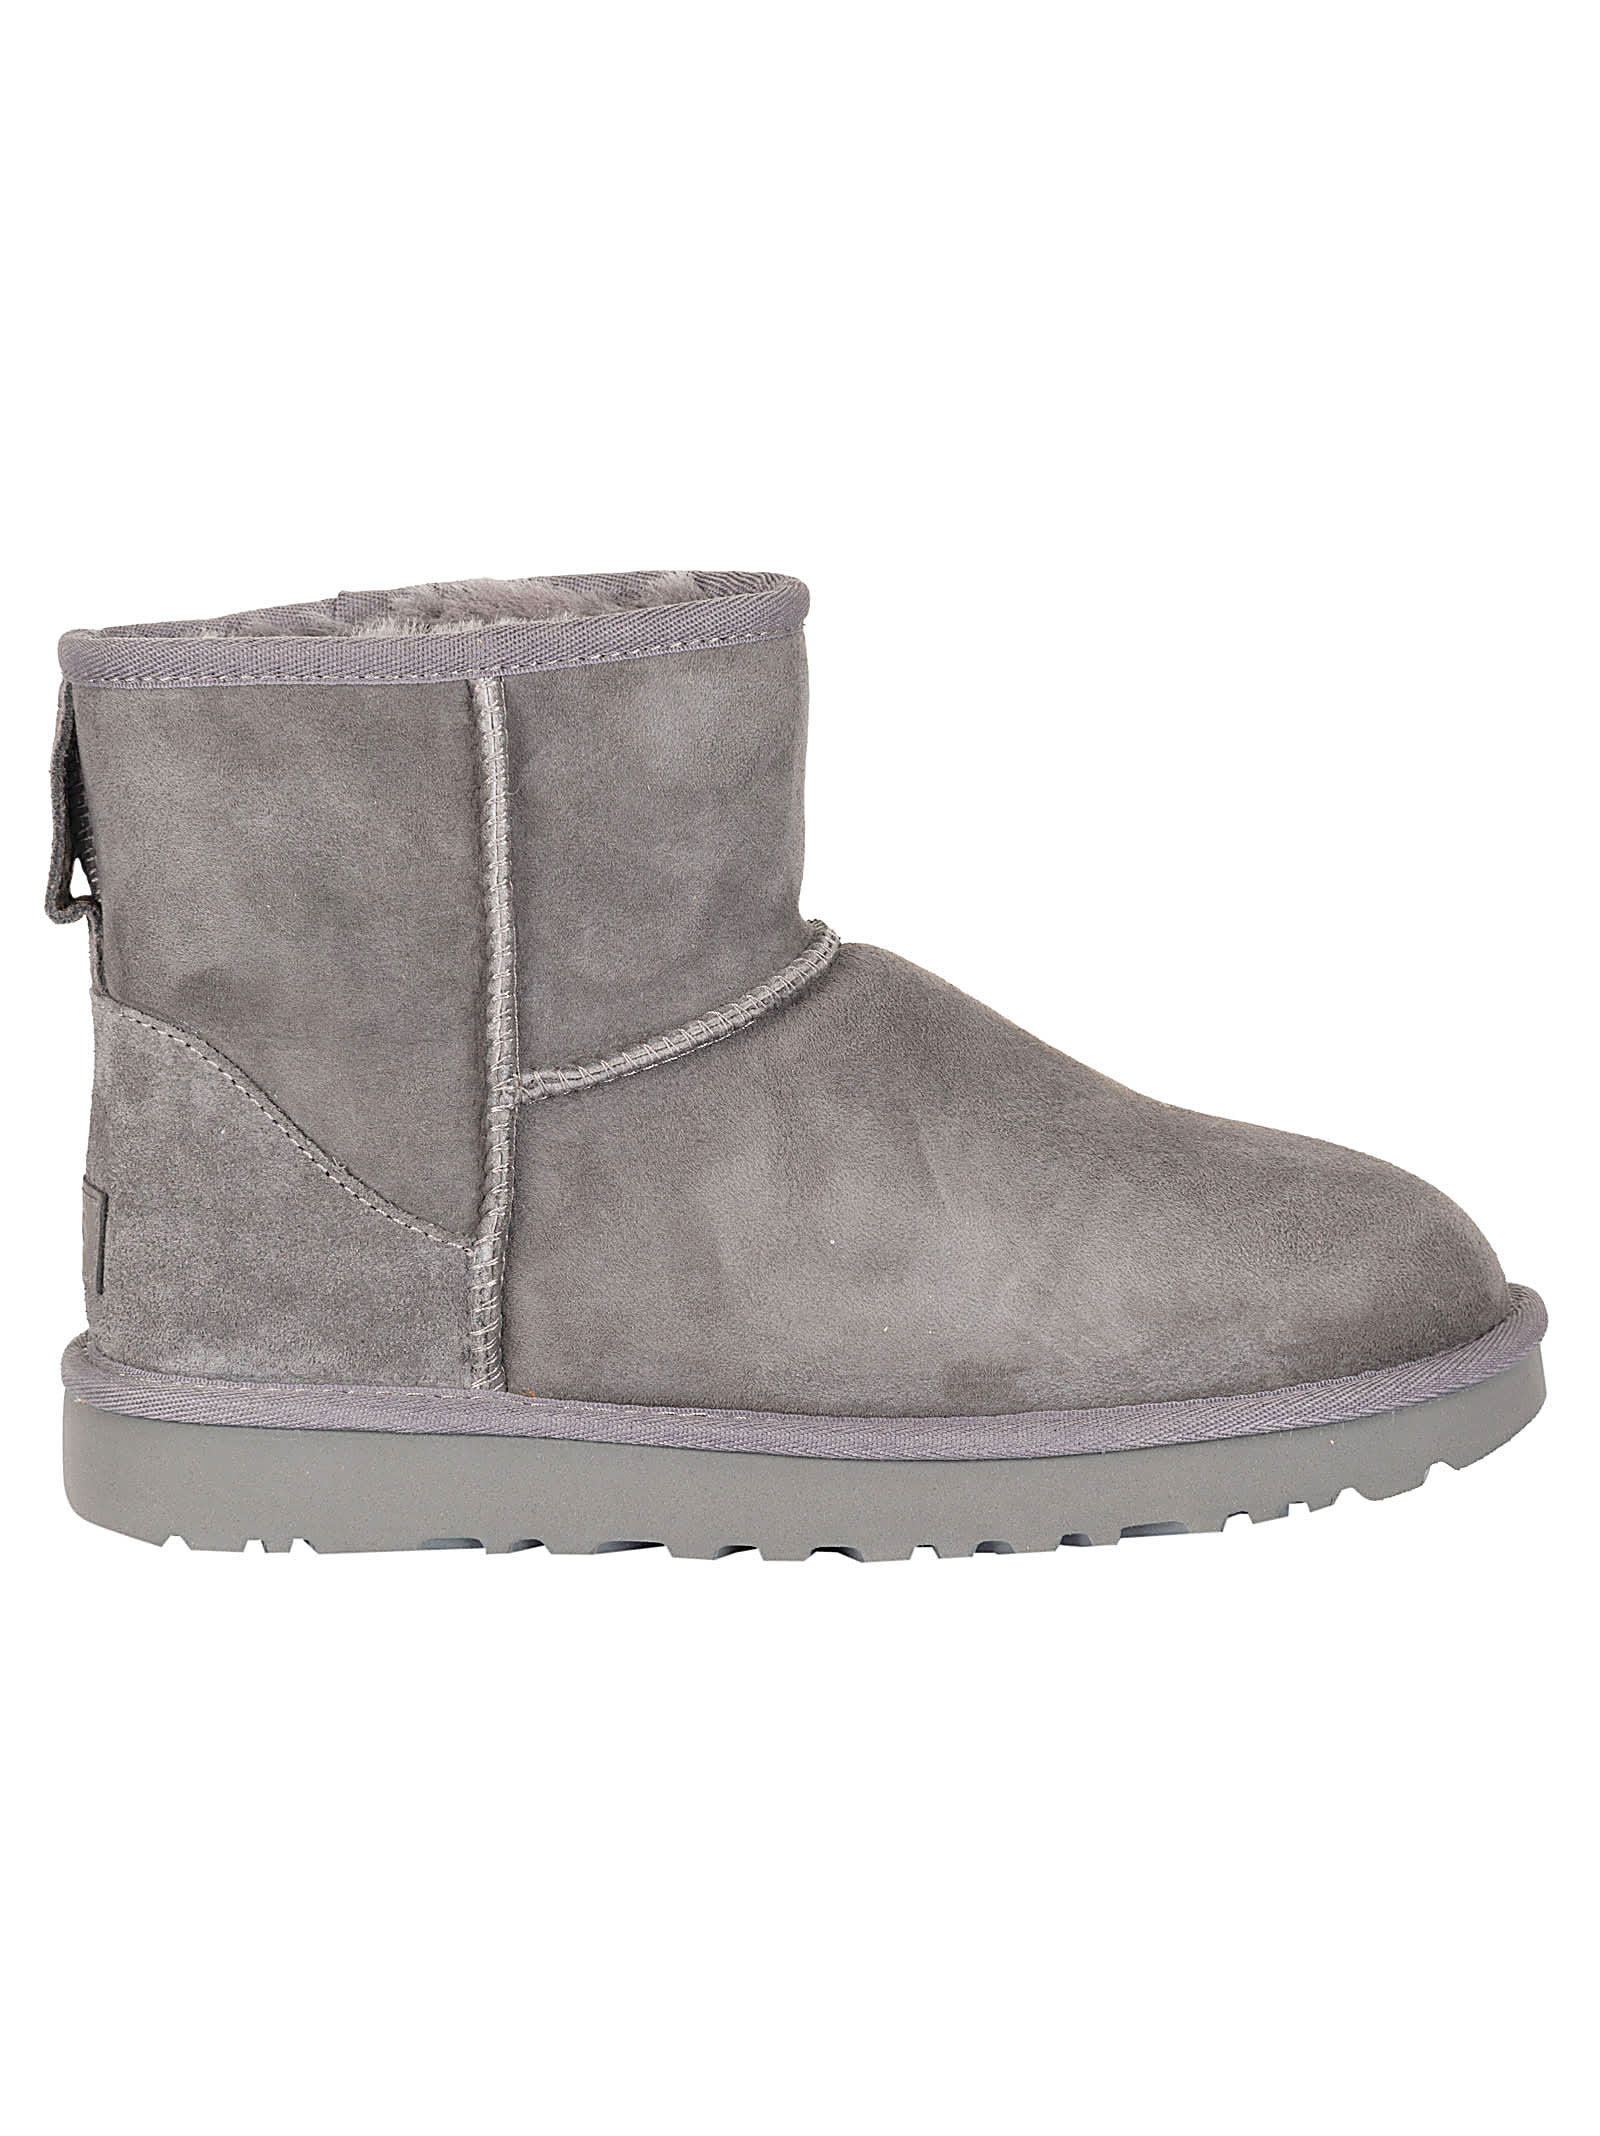 UGG UGG Classic Mini Ankle Boots - Grey 